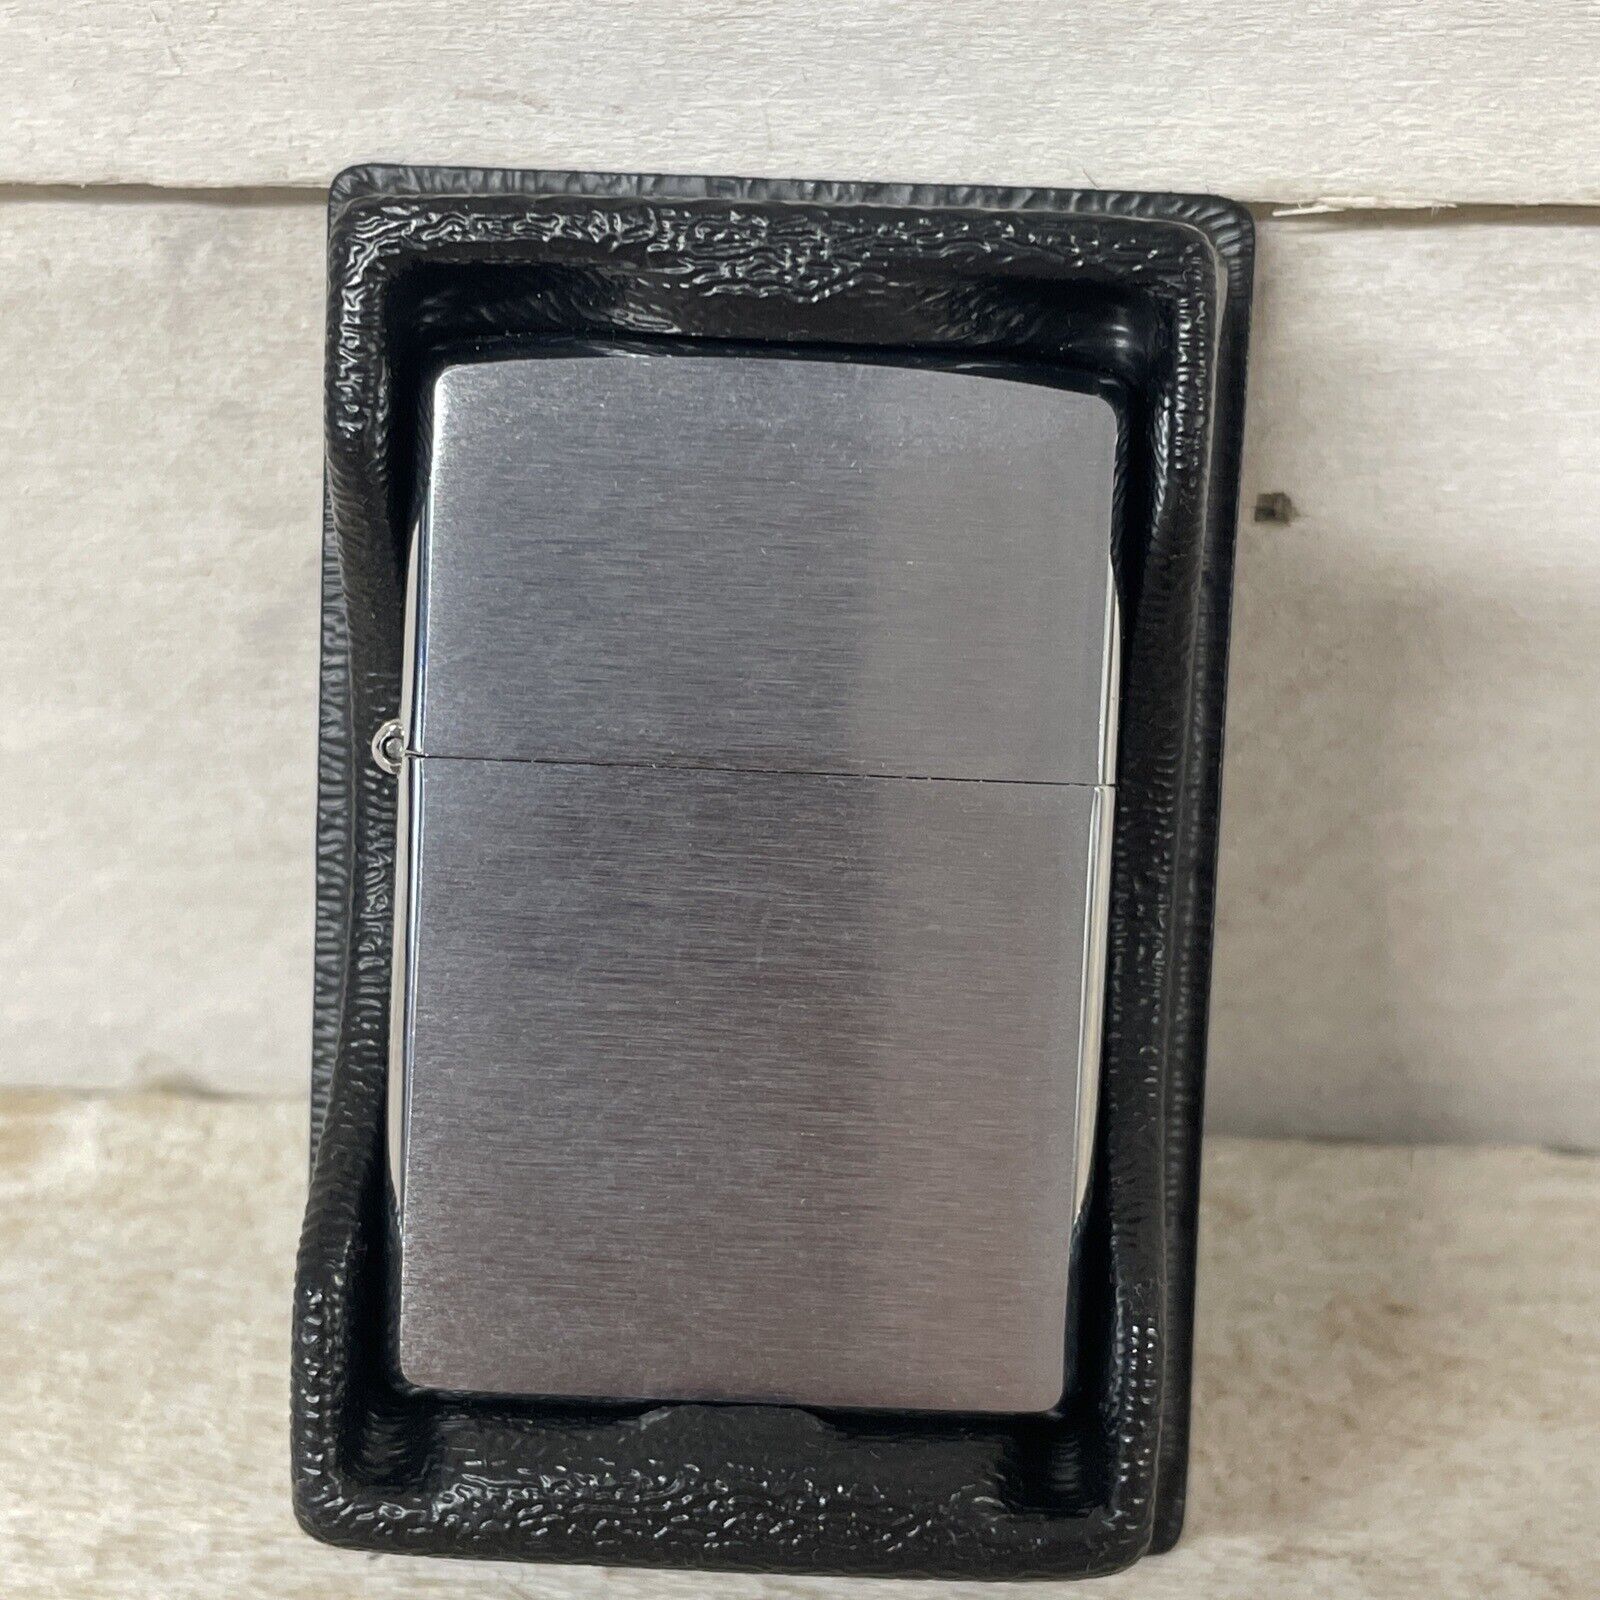 Zippo Pocket Lighter Silver I 05 Made In USA New Sealed Fast Shipping